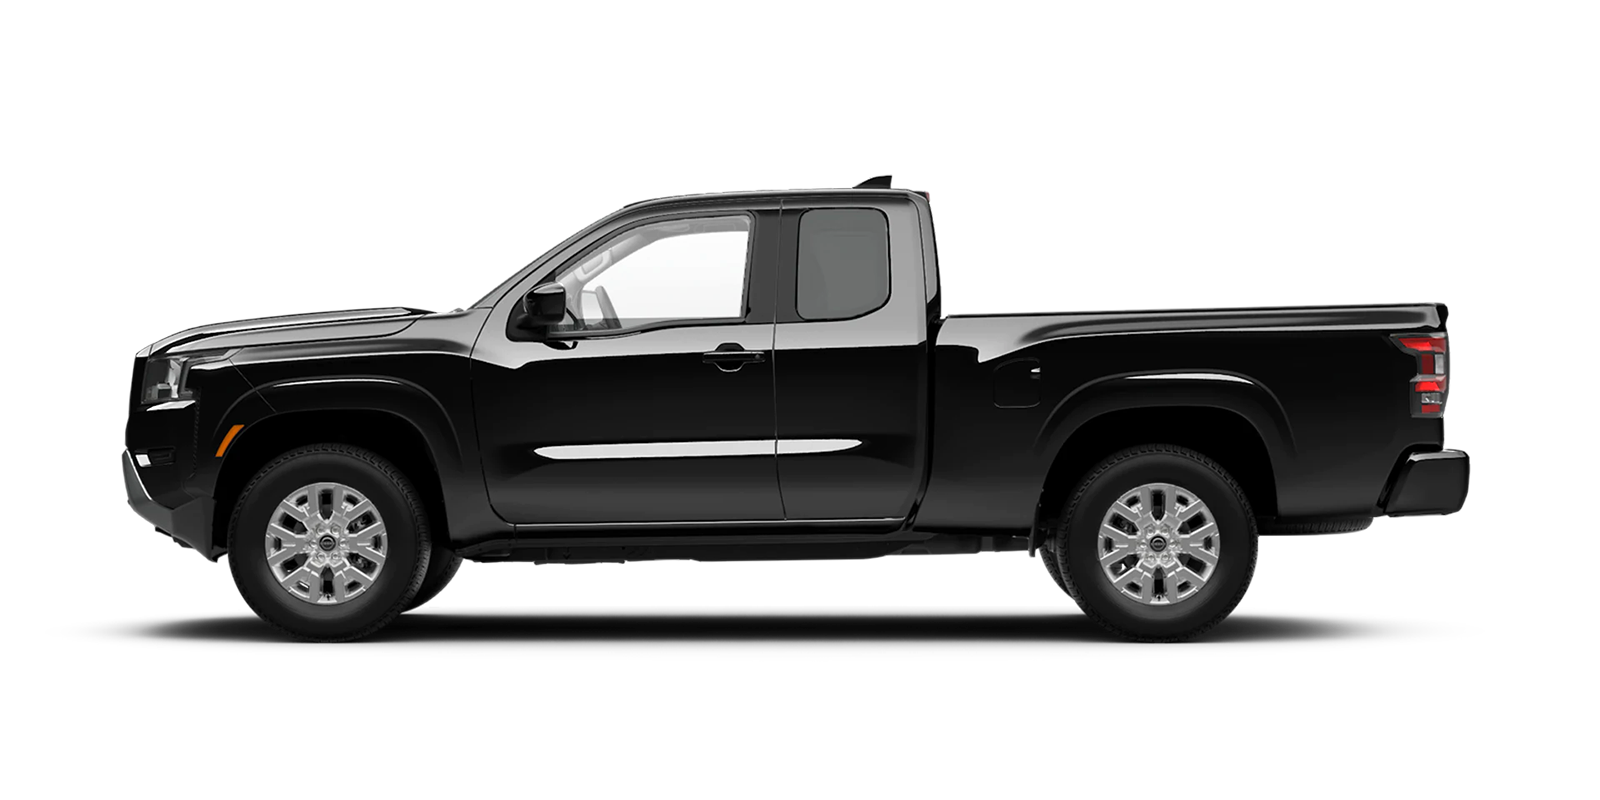 2022 Frontier King Cab SV 4x4 in Super Black | Nissan of Pittsfield in Pittsfield MA